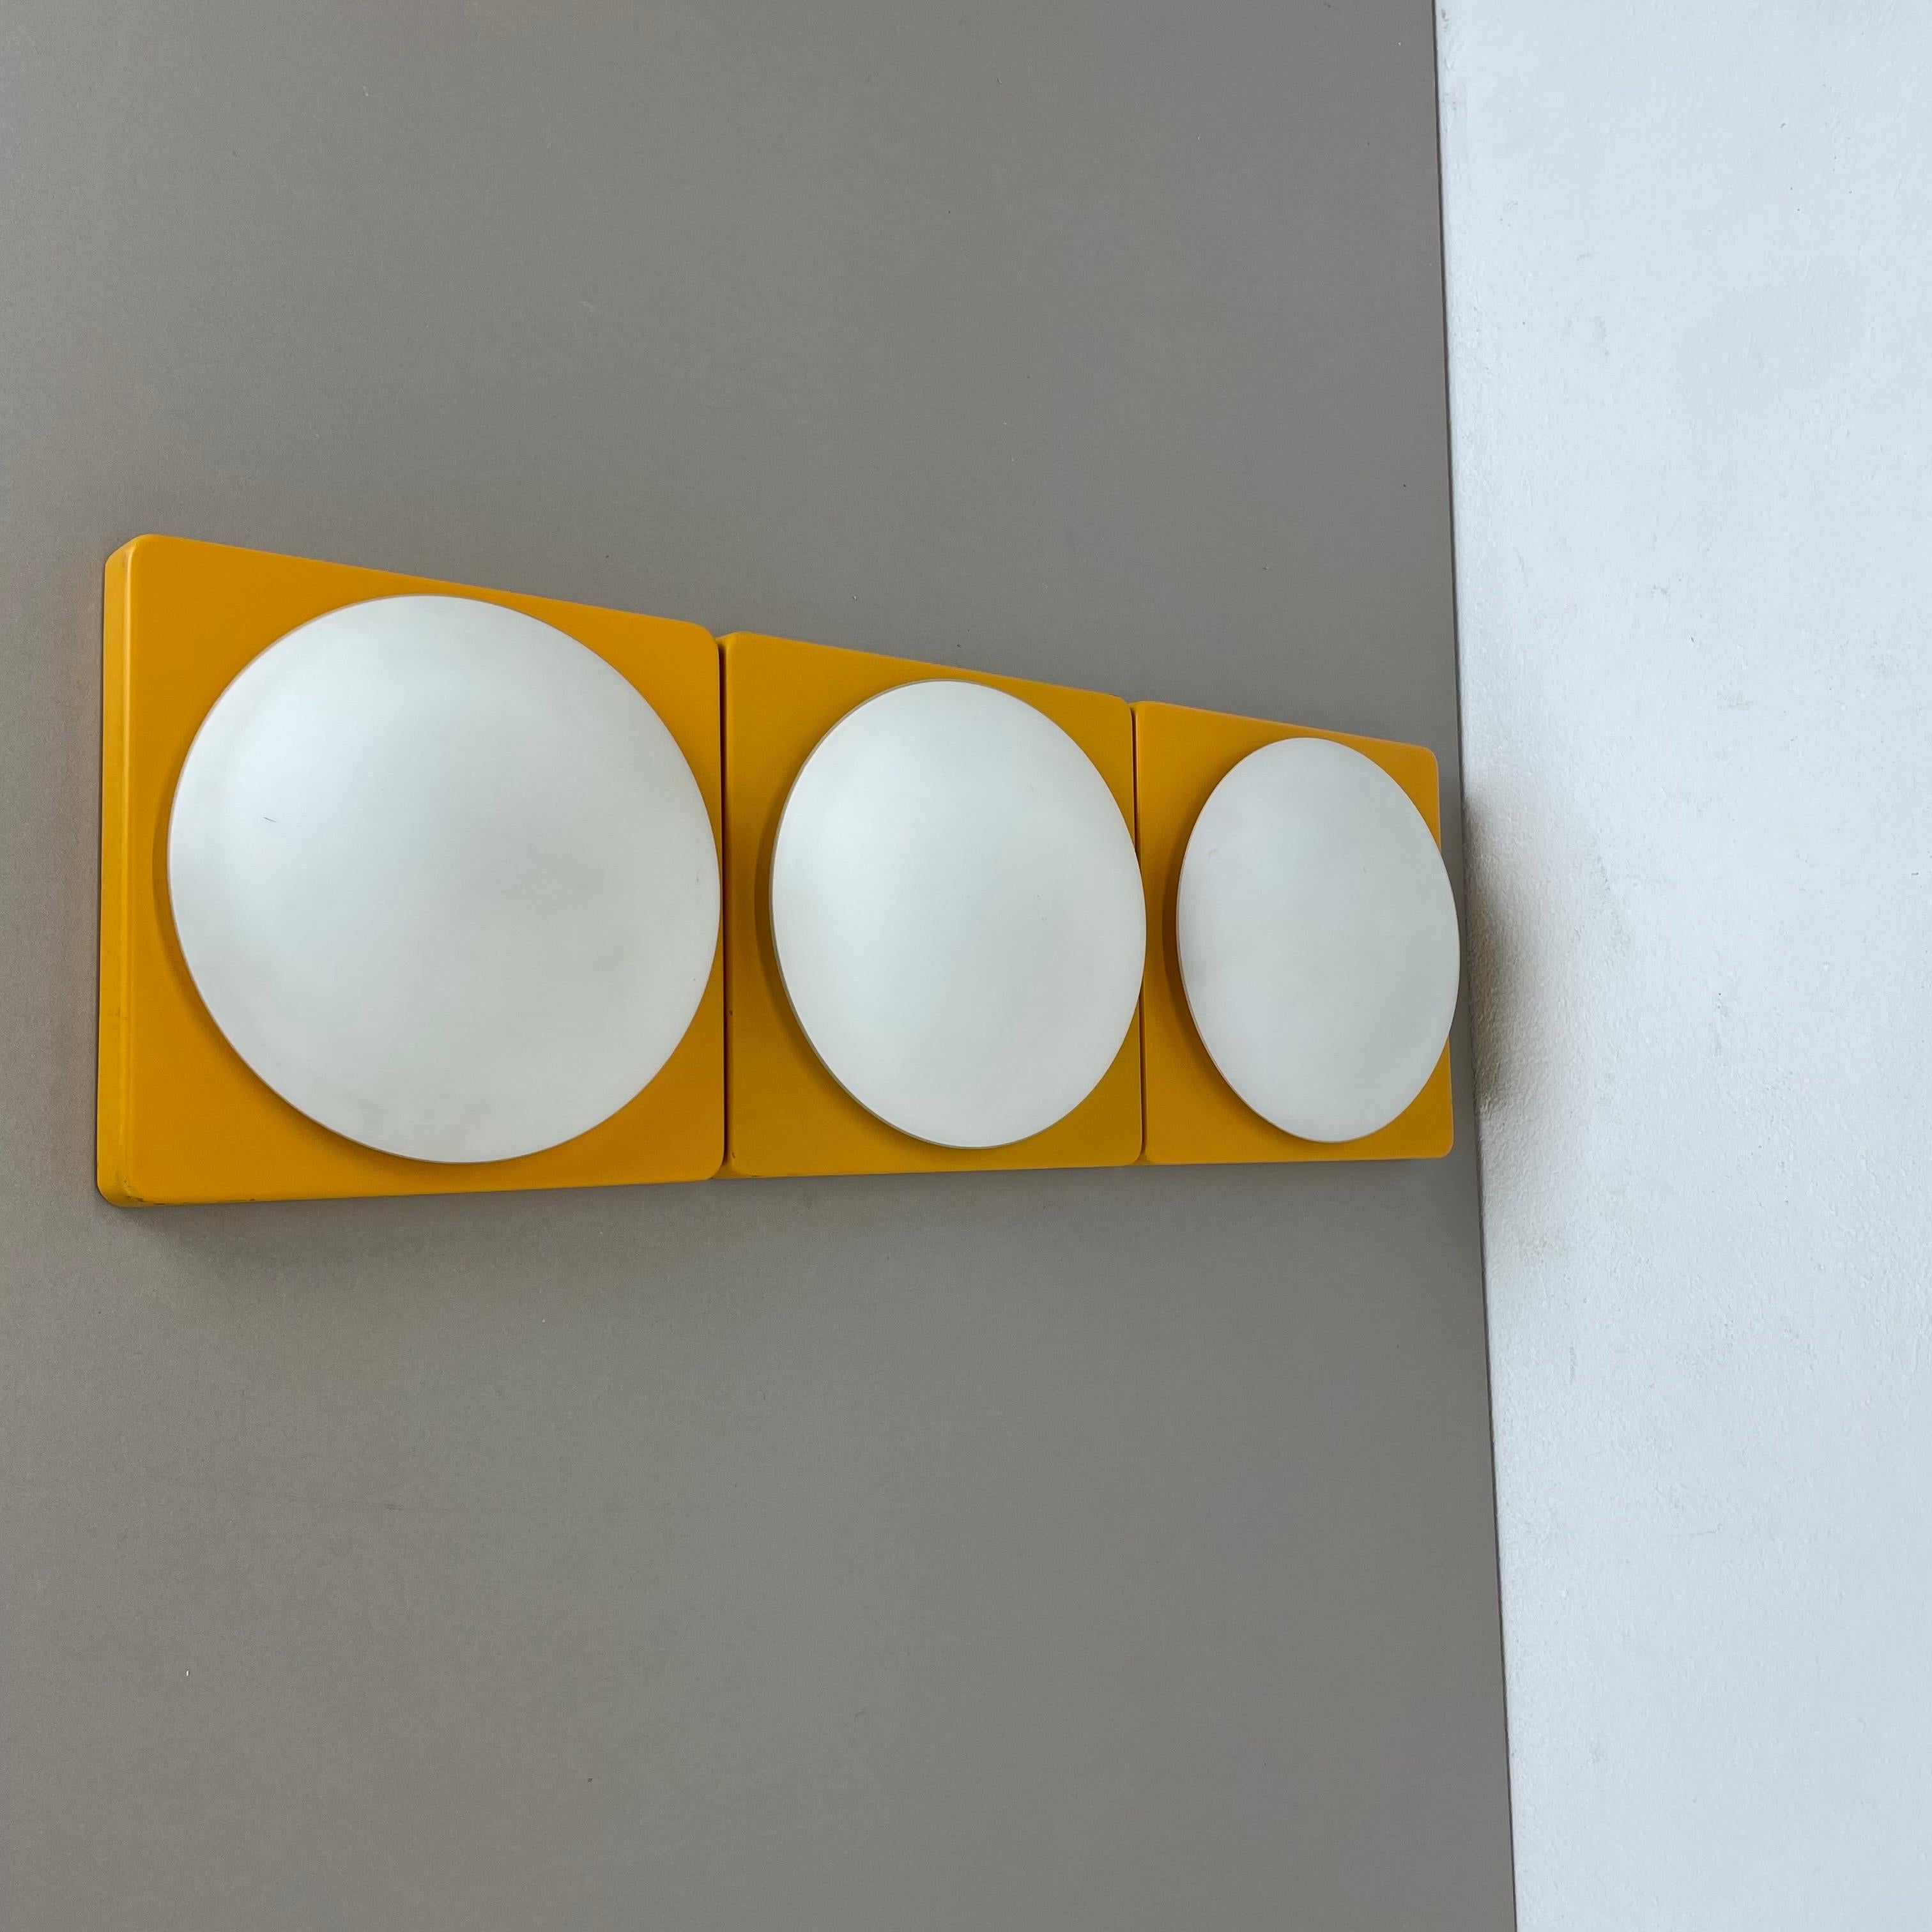 Article:

Set of three cubic wall lights



Producer:

Neuhaus Leuchten, Germany


Age:

1970s


Set of 3 originals, 1970s German modernist wall Lights made of solid metal with a frosted glass shade in the middle. This light was